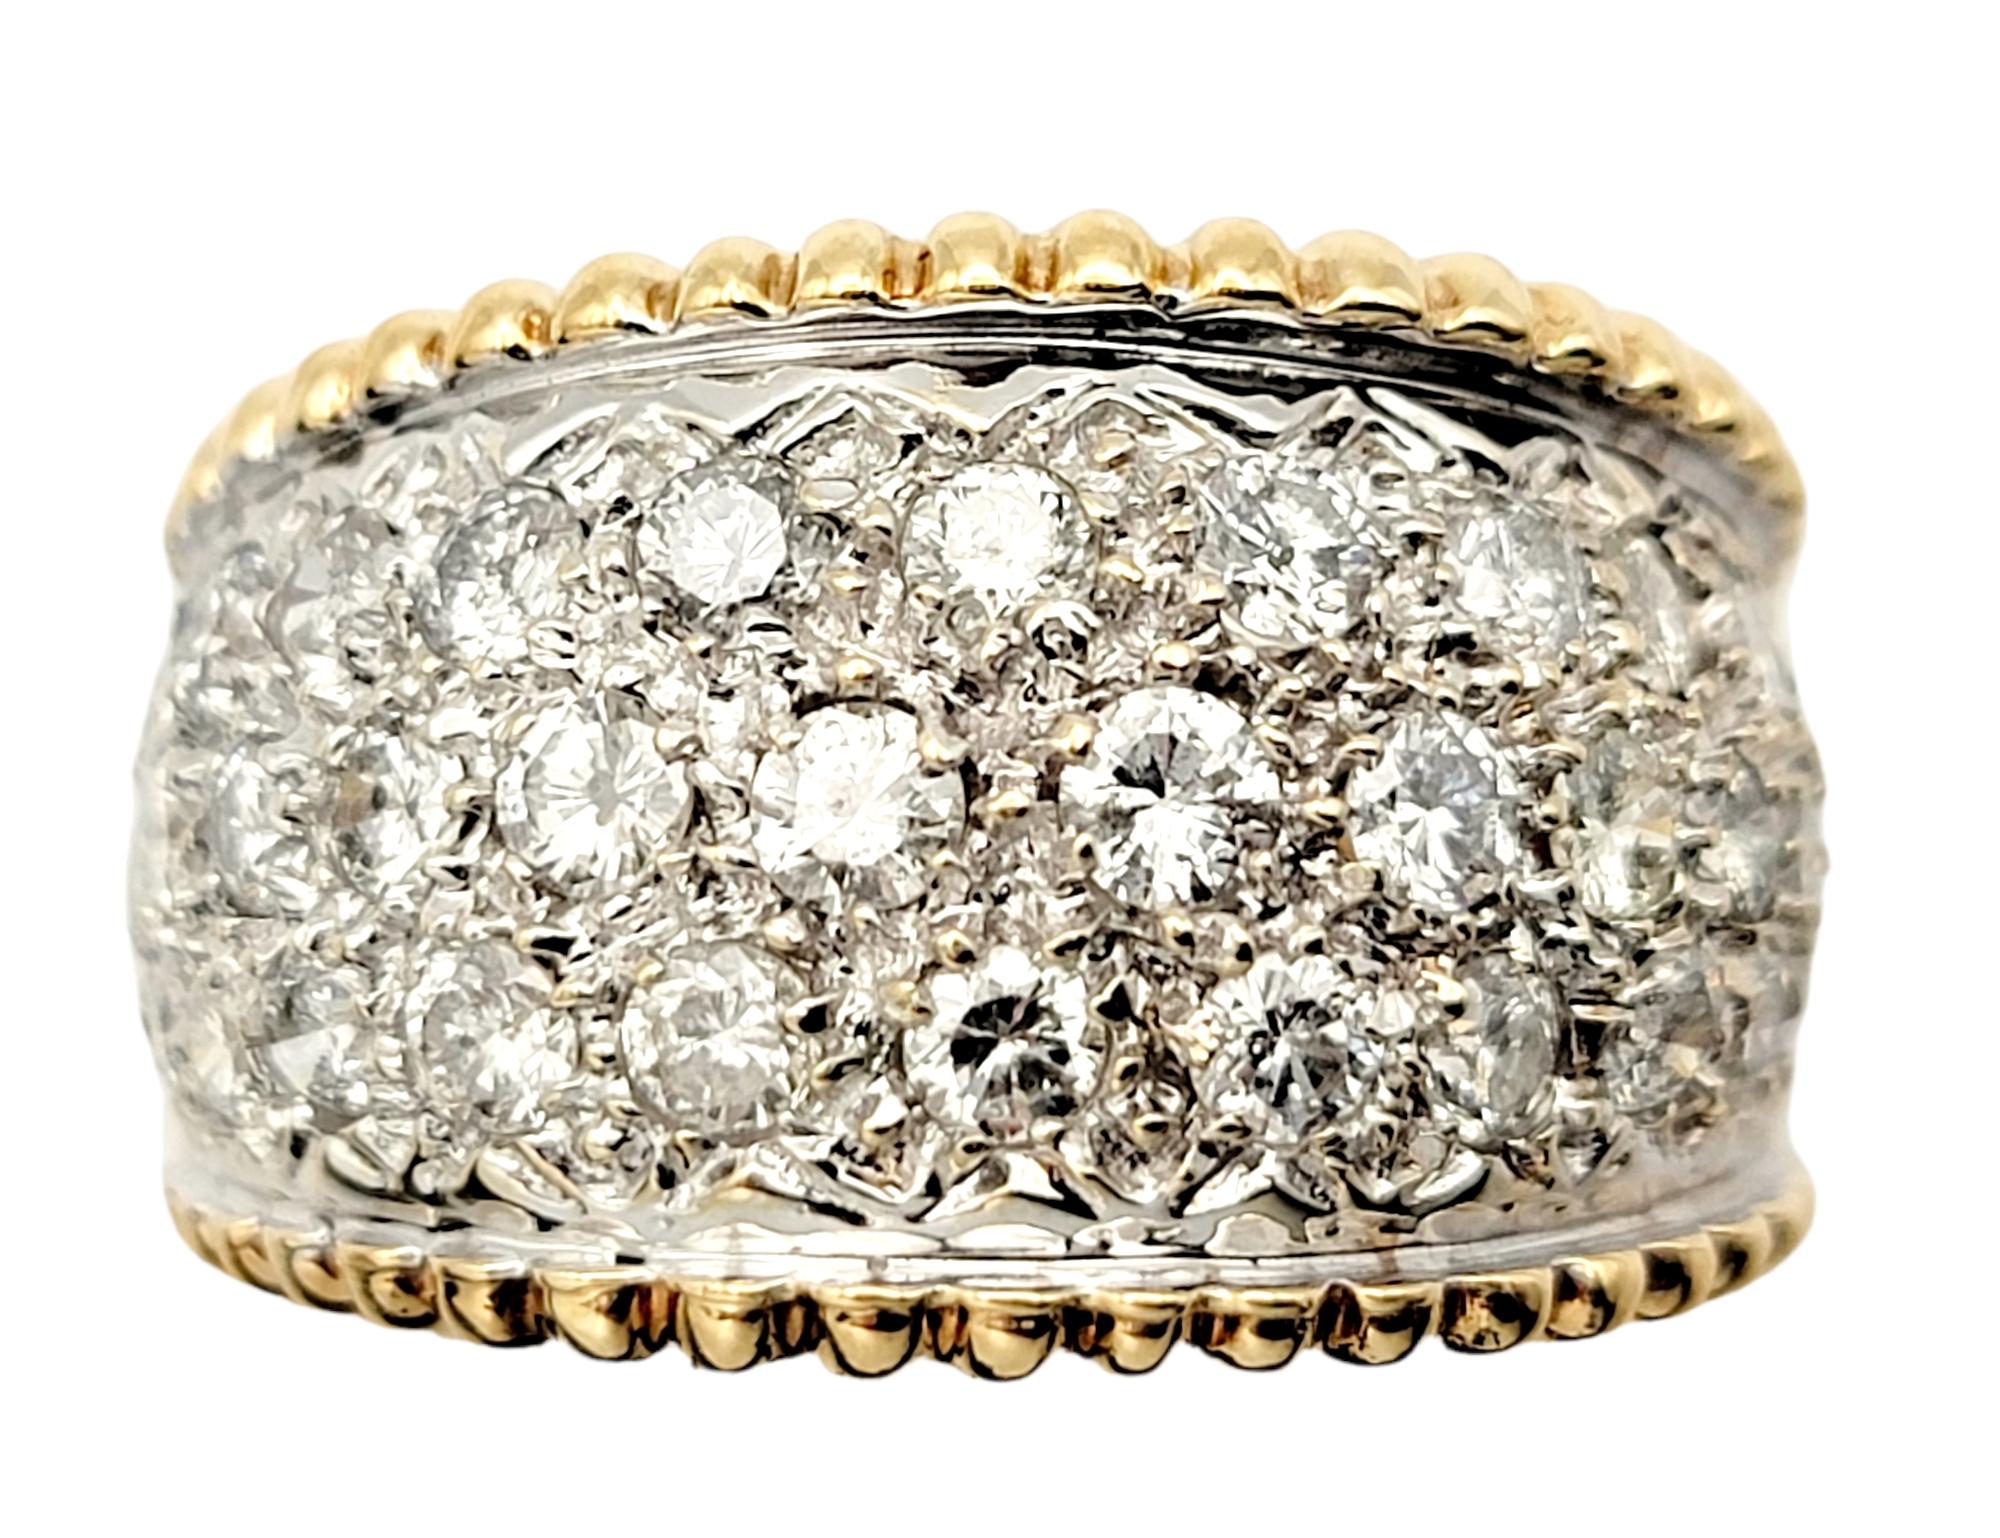 Ring size: 6.75

This dazzling diamond band ring wraps elegantly around the finger and fills it with sparkle. Featuring a wide, two tone design, the glittering natural stones catch the light from every angle, making it shimmer and shine beautifully.